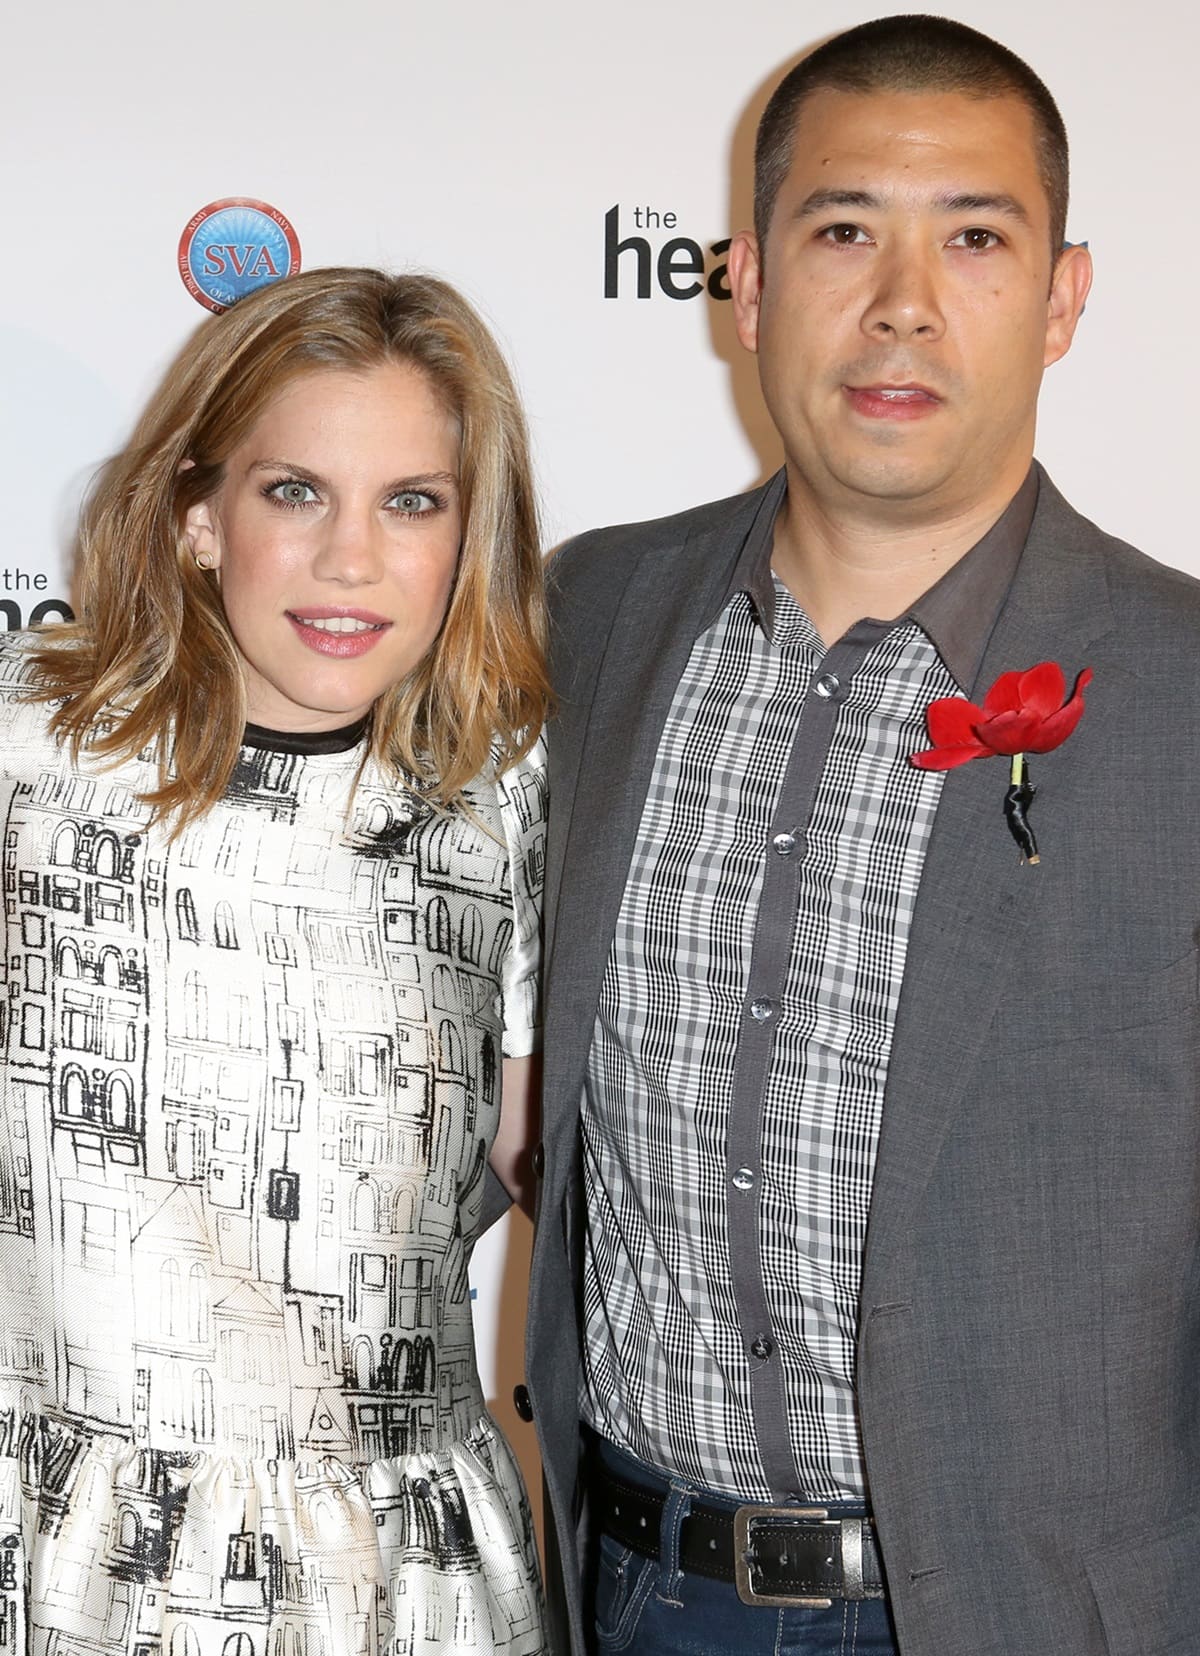 Anna Chlumsky and Shaun So met during their undergraduate studies at the University of Chicago in the early 2000s and married on March 8, 2008